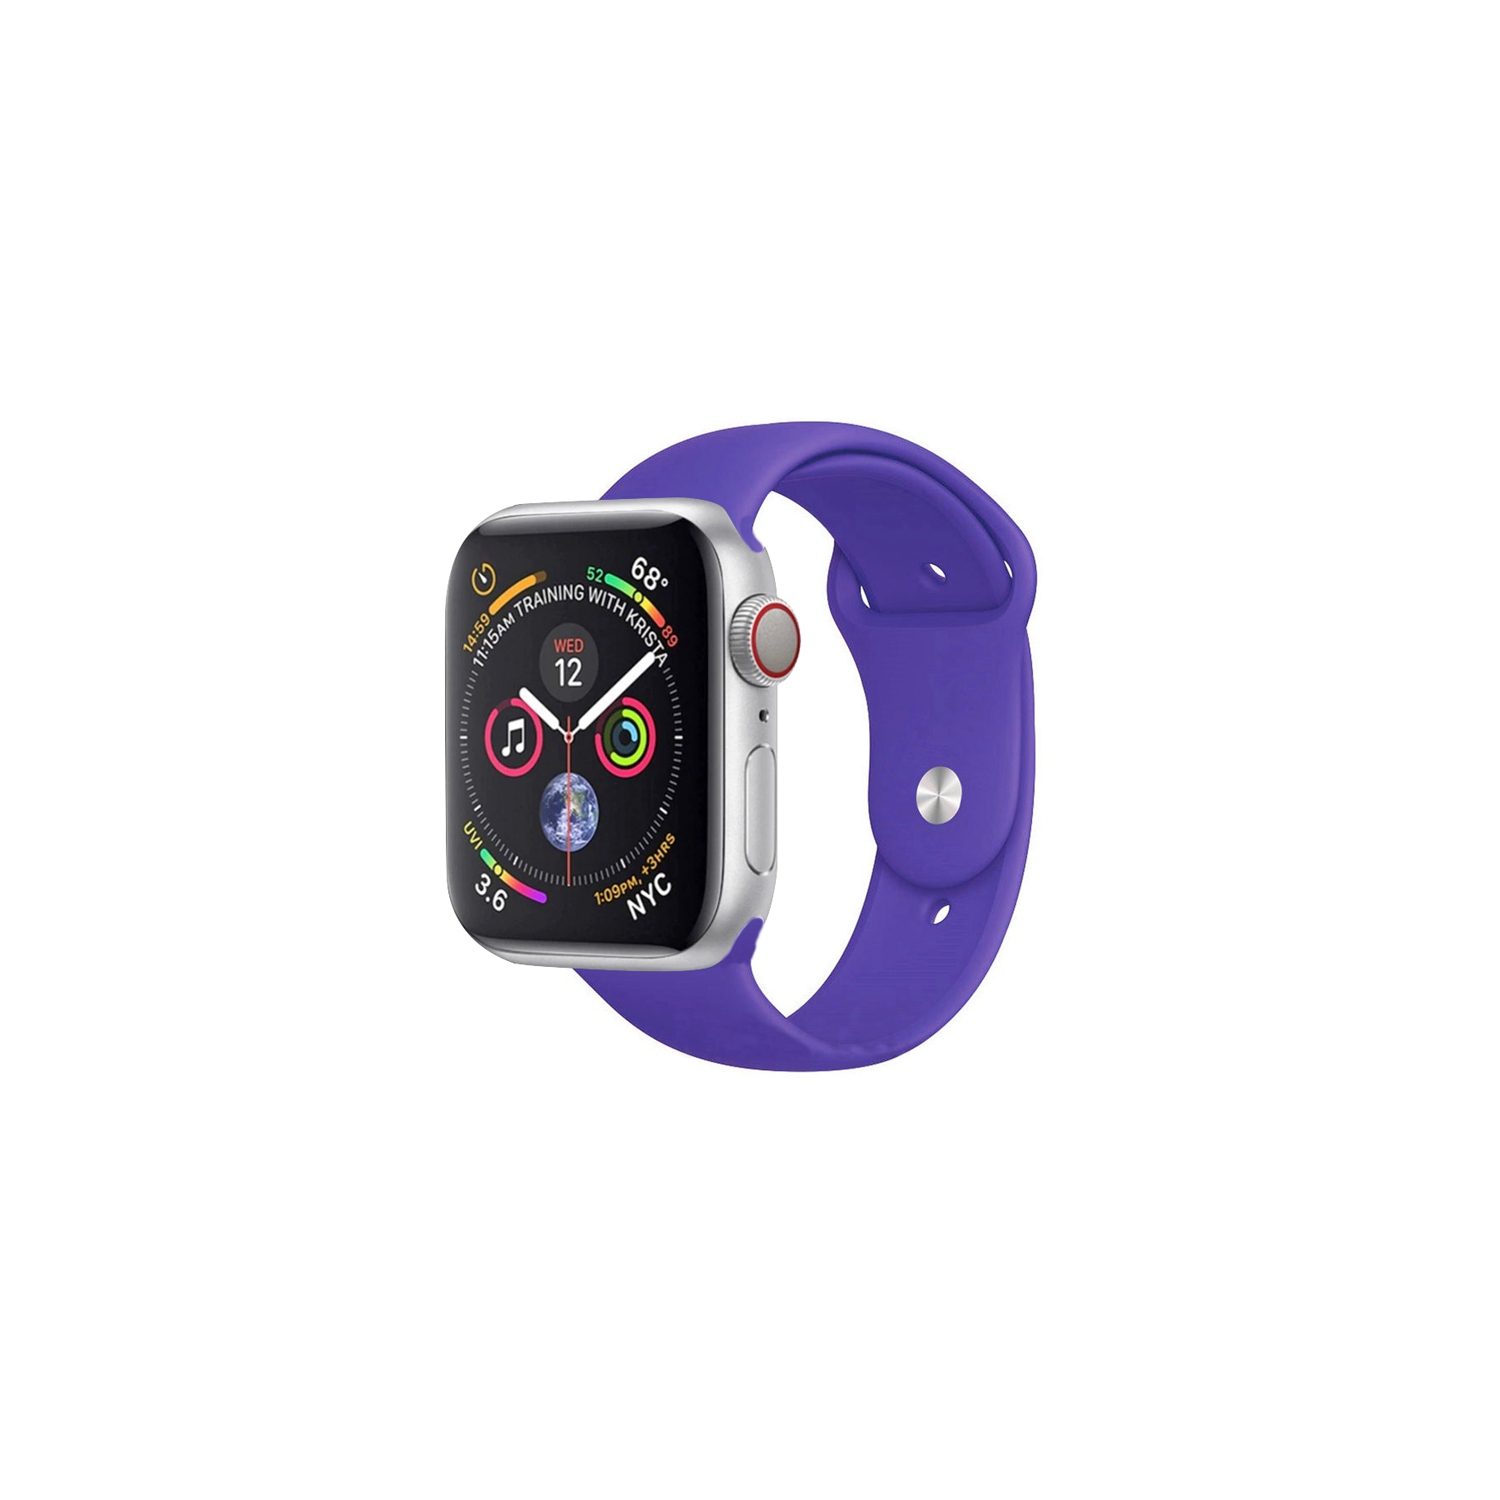 Watch Strap Silicone Sports Band Bracelet M/L Size For Apple iWatch Series 42mm/44mm - Purple